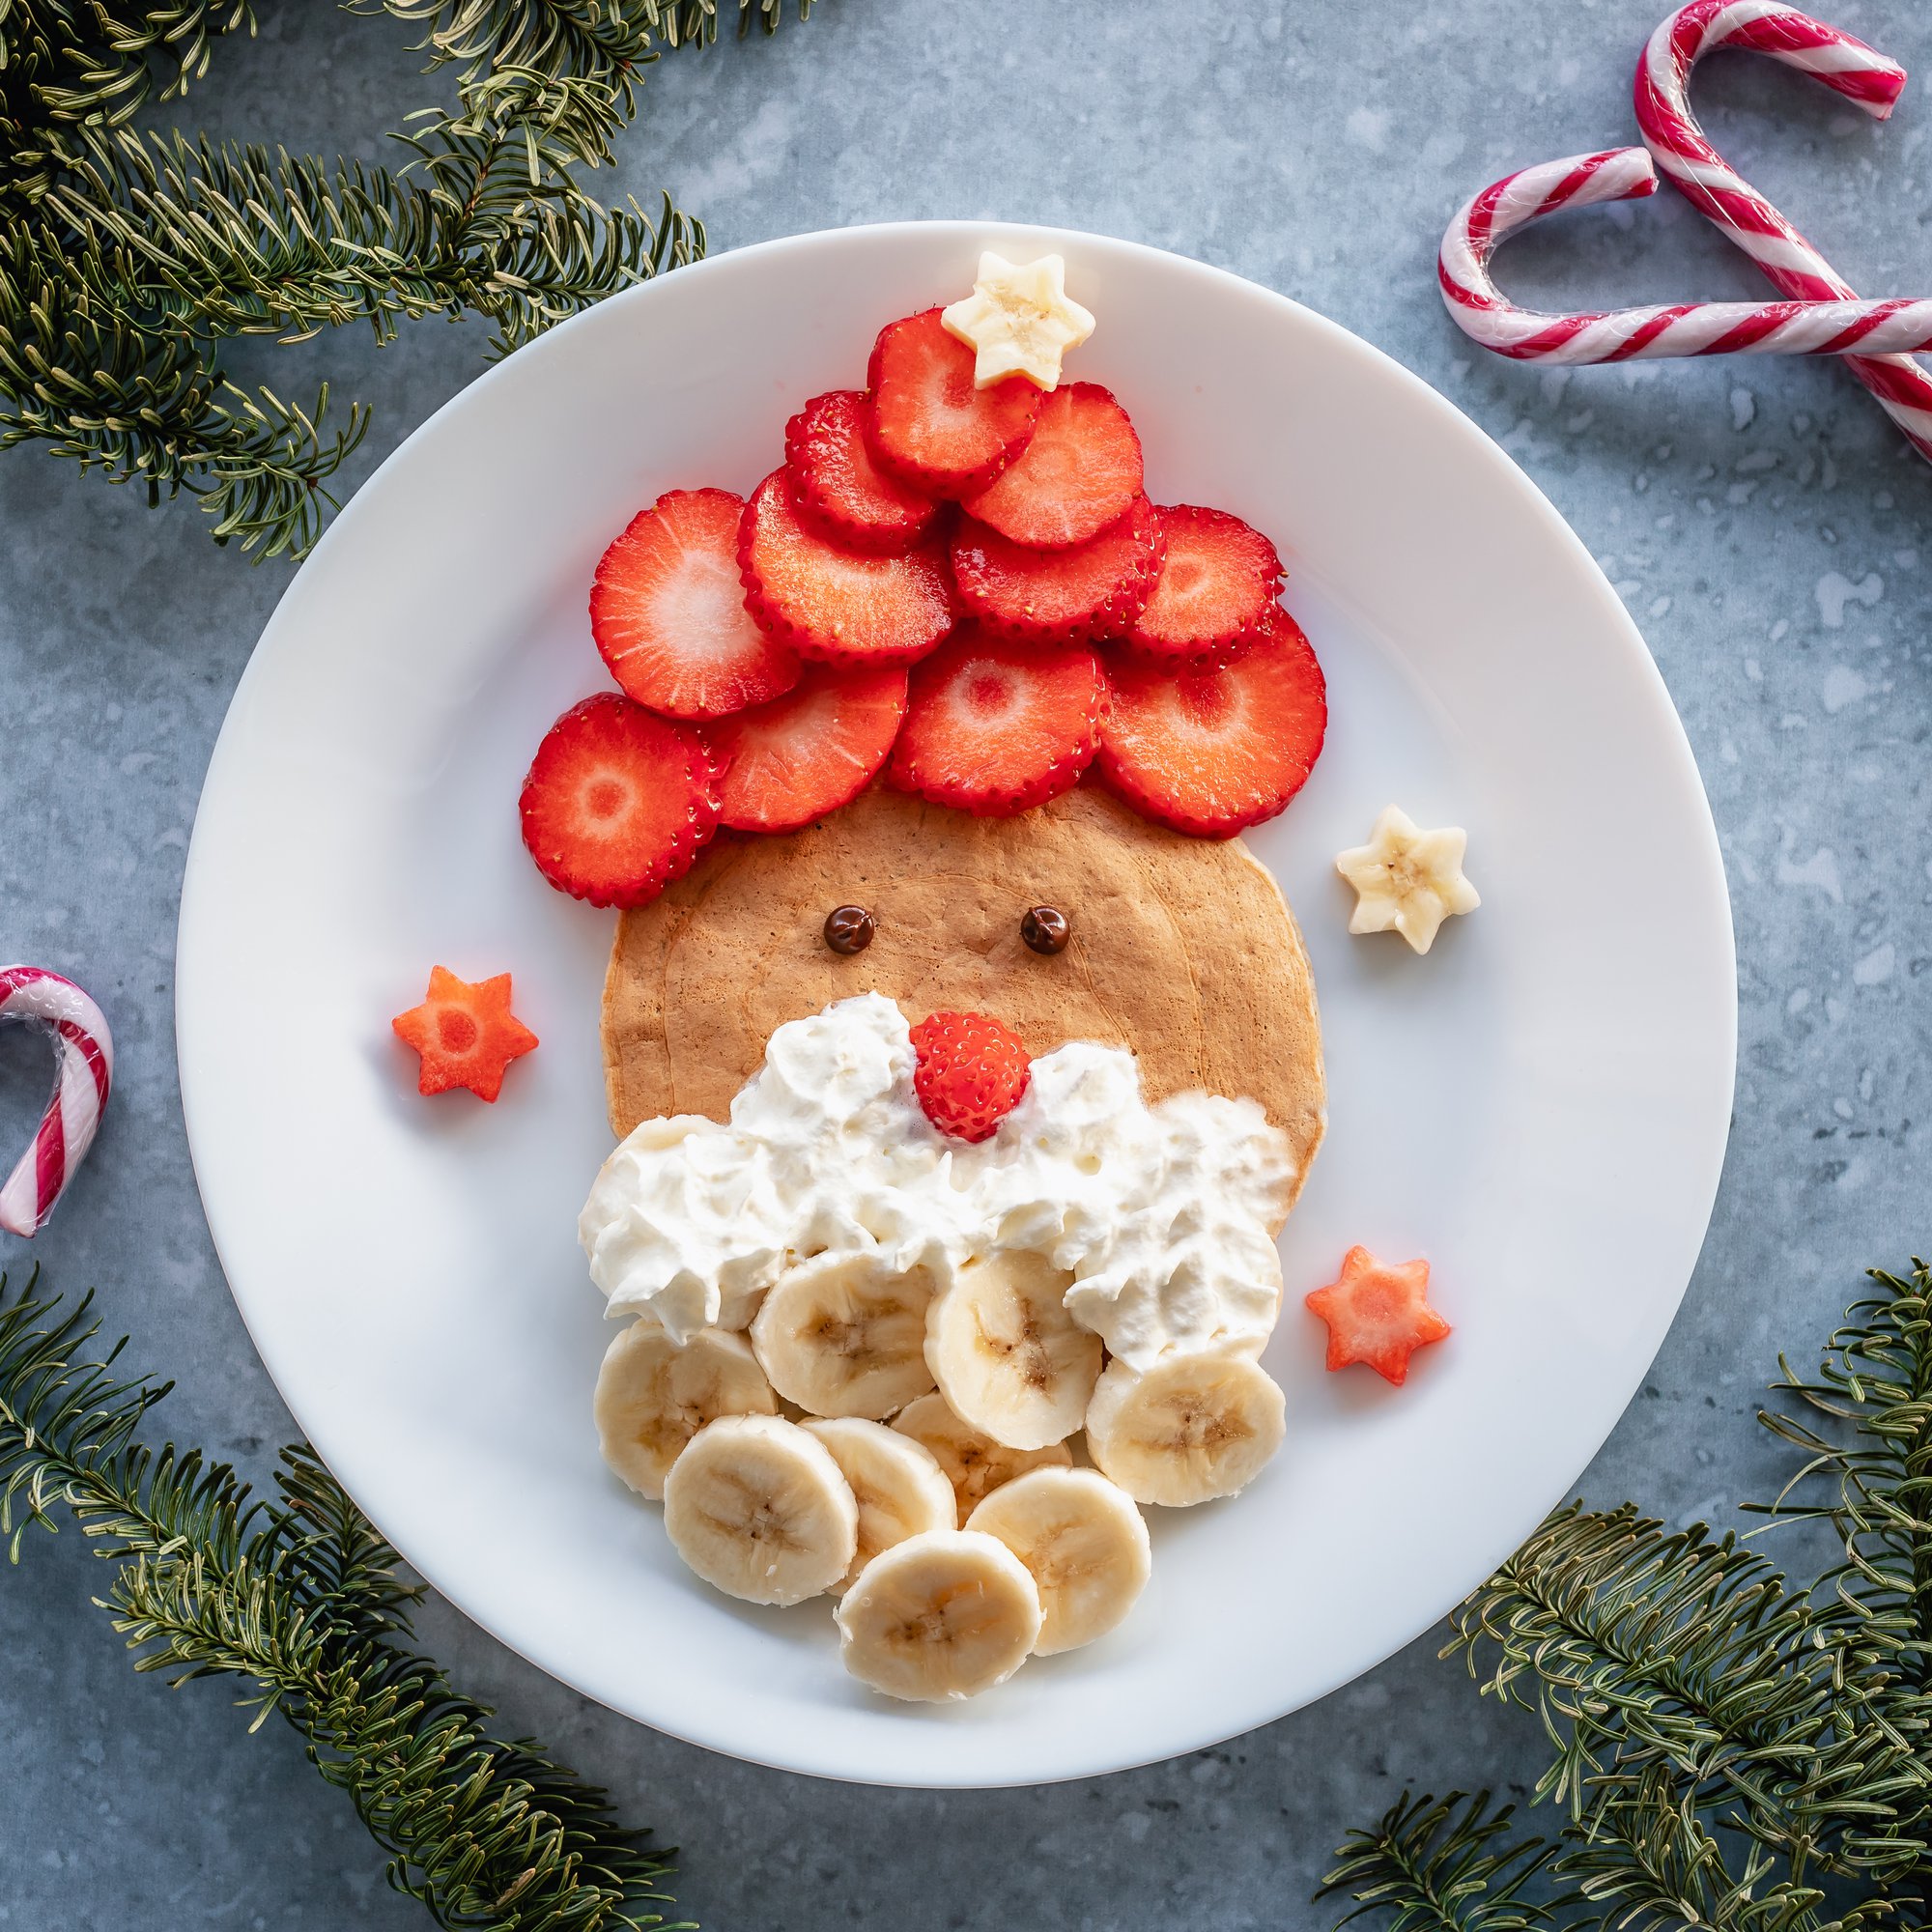 Pancakes for Christmas? What a great idea!